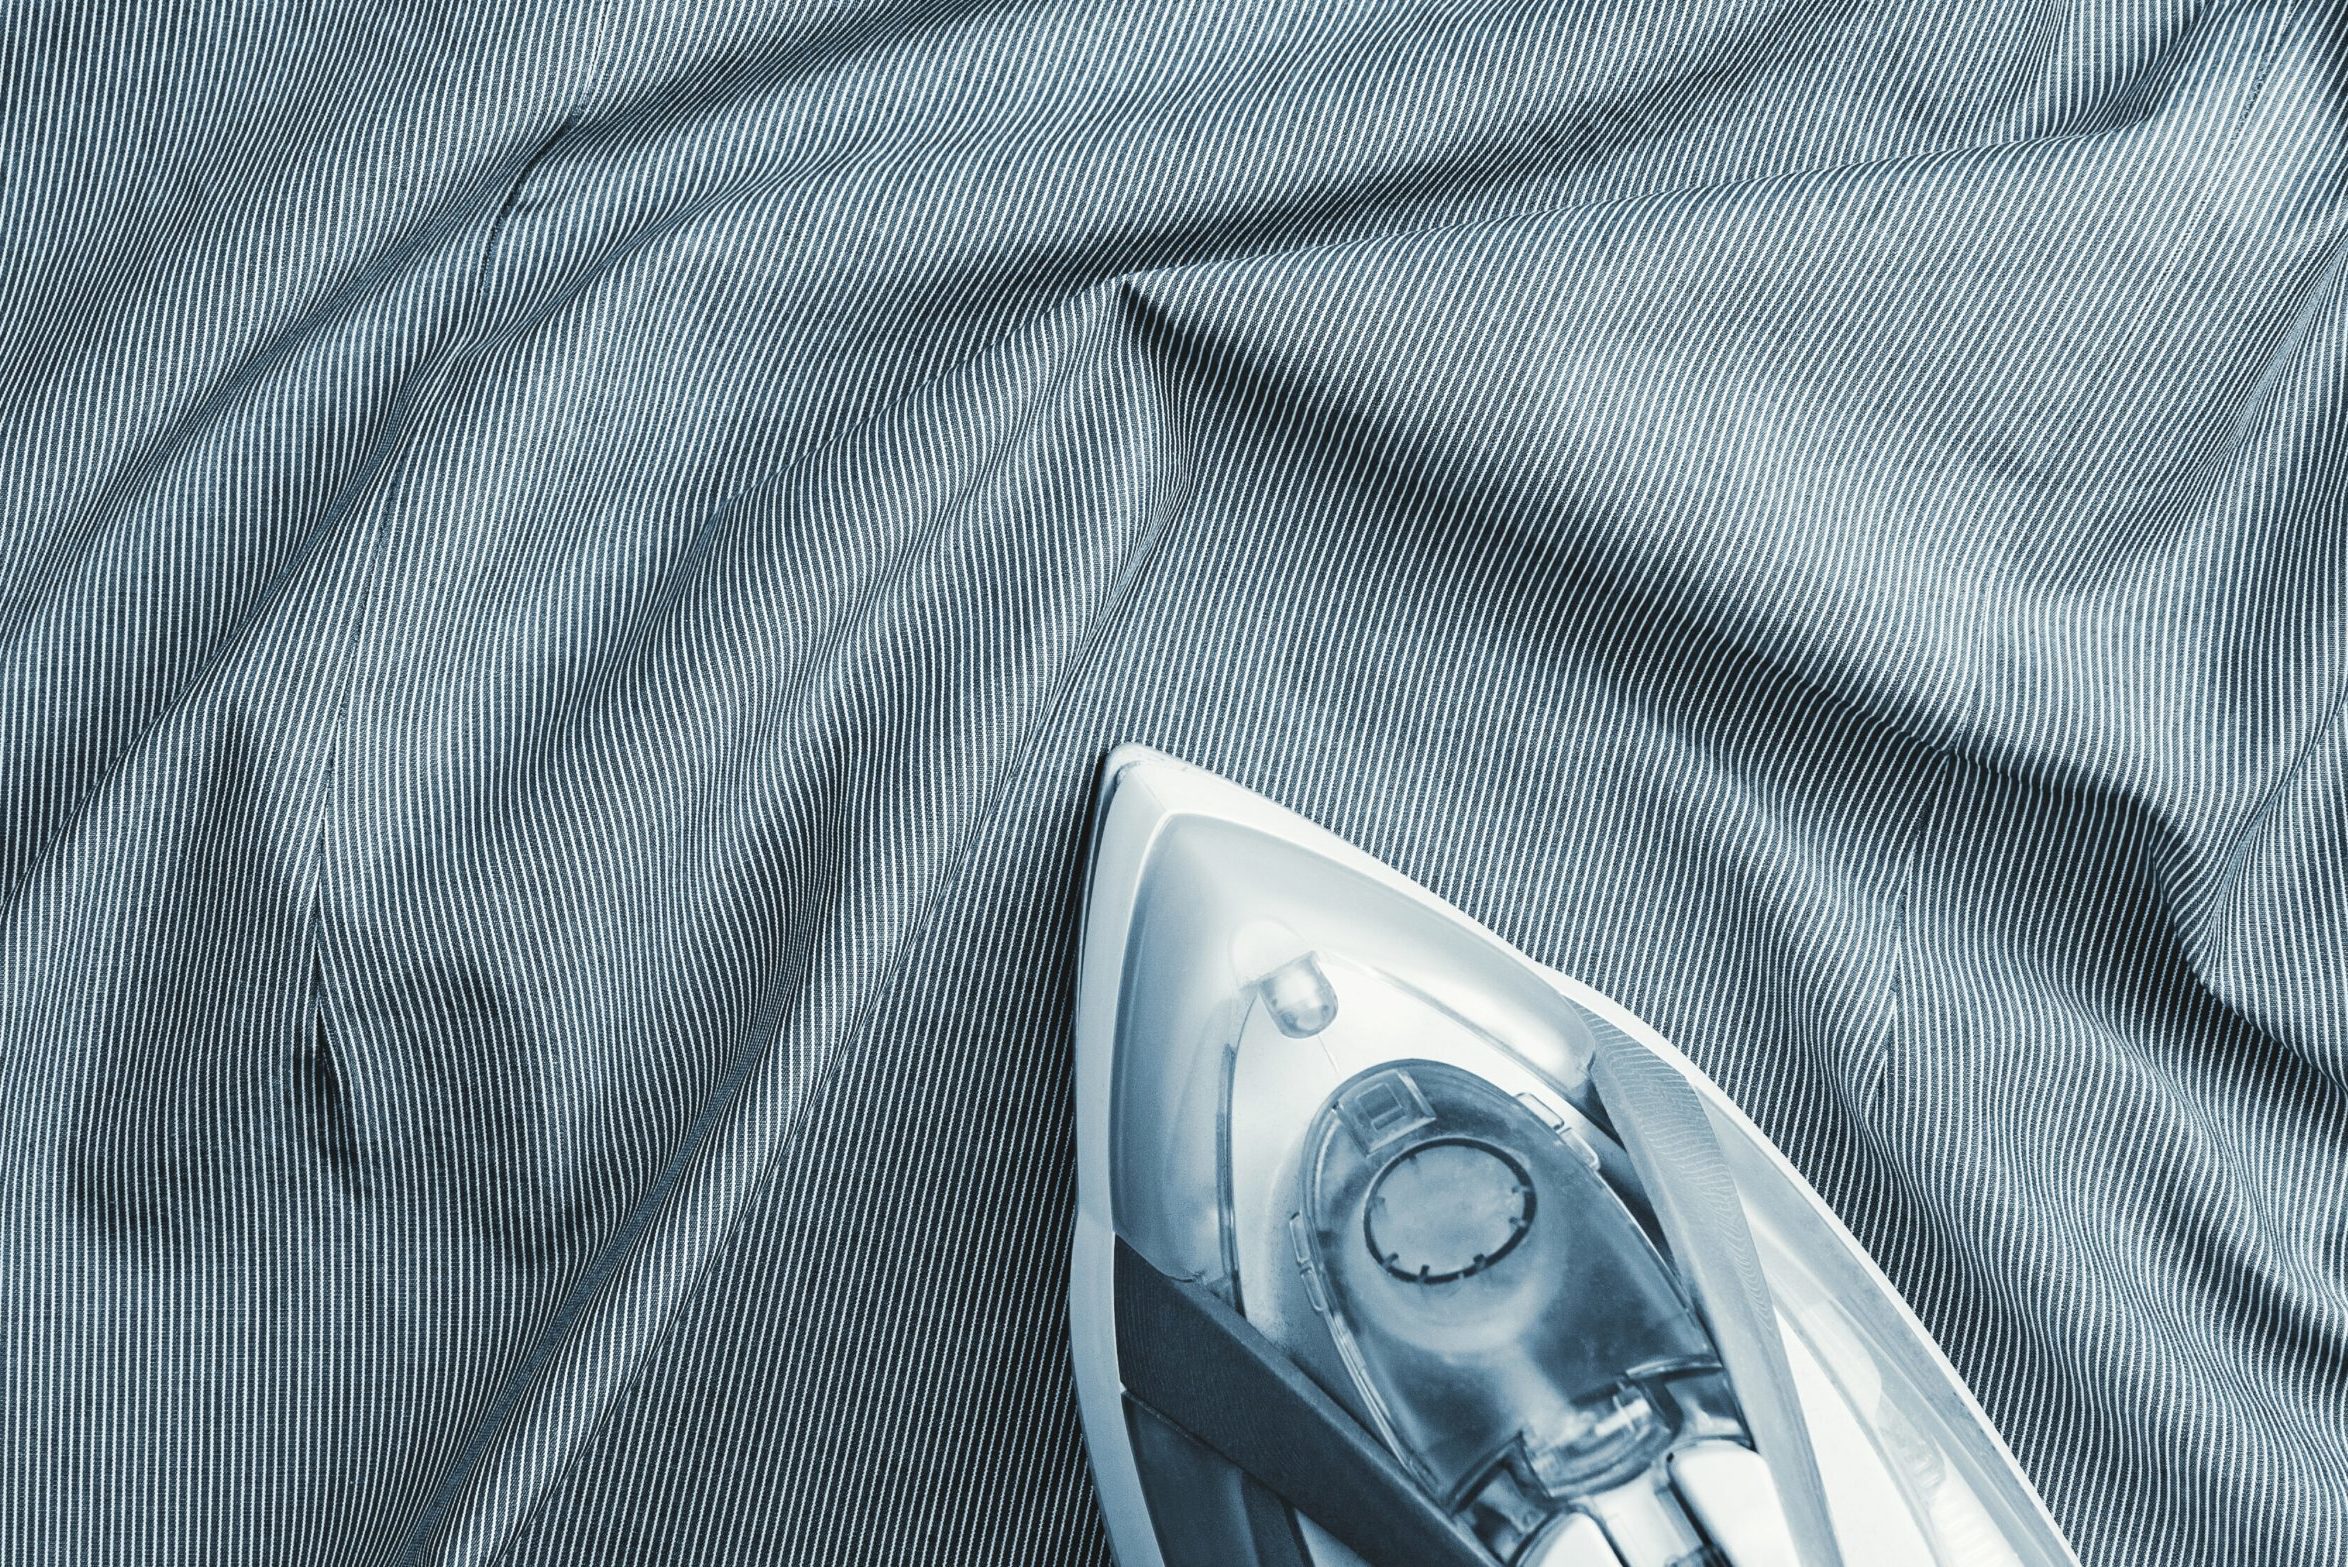 How to Iron — Instructions on How to Get Wrinkles Out of Clothes